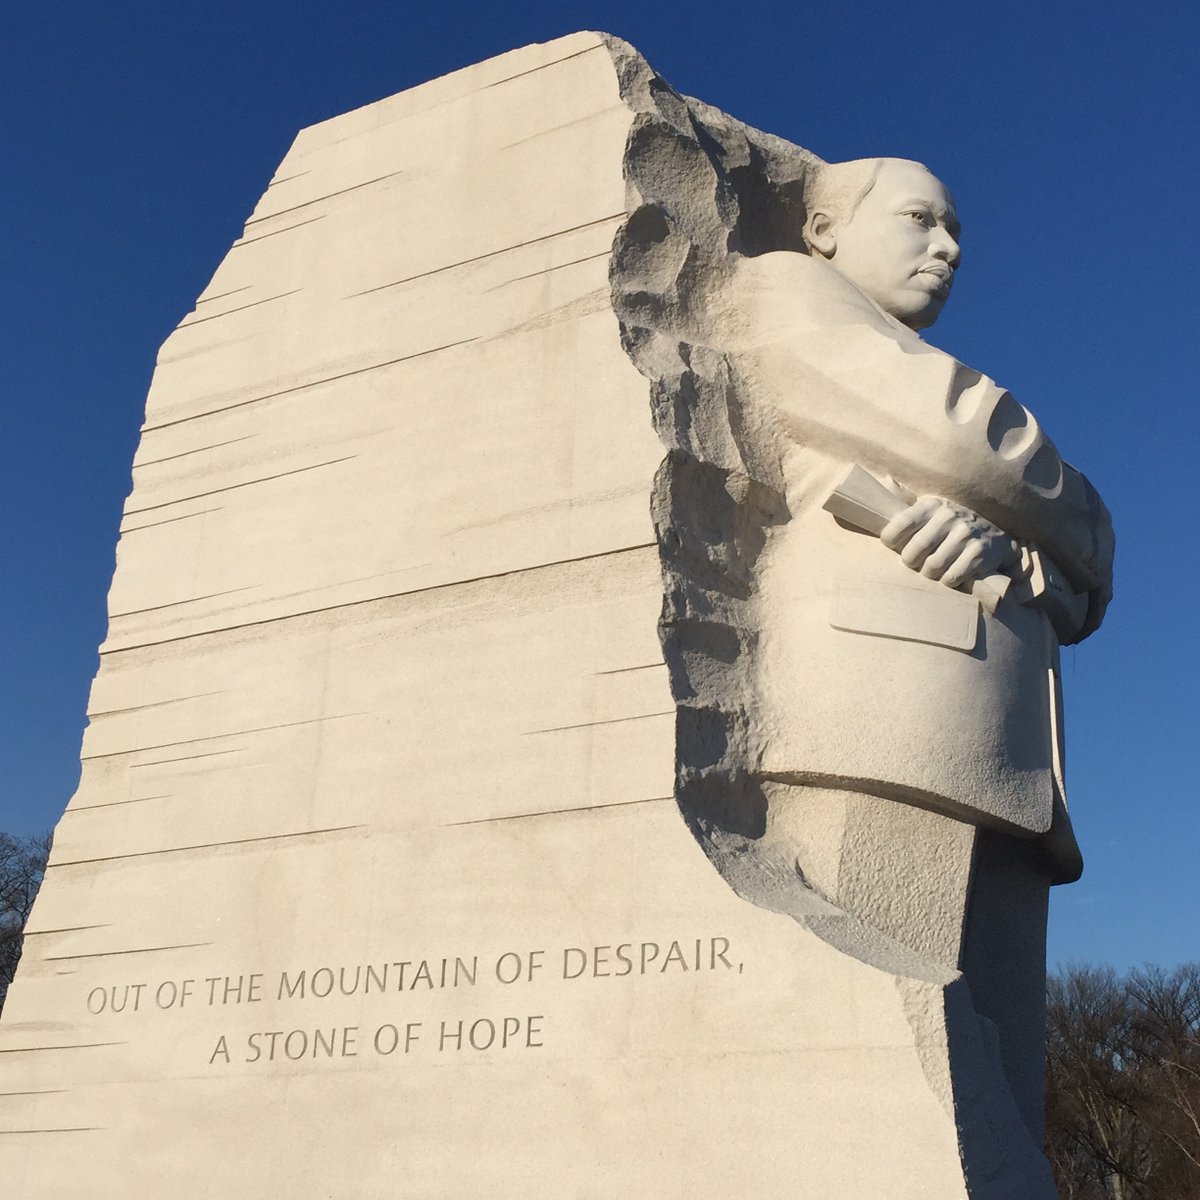 On the anniversary of Dr. Martin Luther King, Jr.’s birthday, may we take time to read his writings, listen to his speeches, and recommit ourselves to his nonviolent movement to advance racial and economic justice for all.